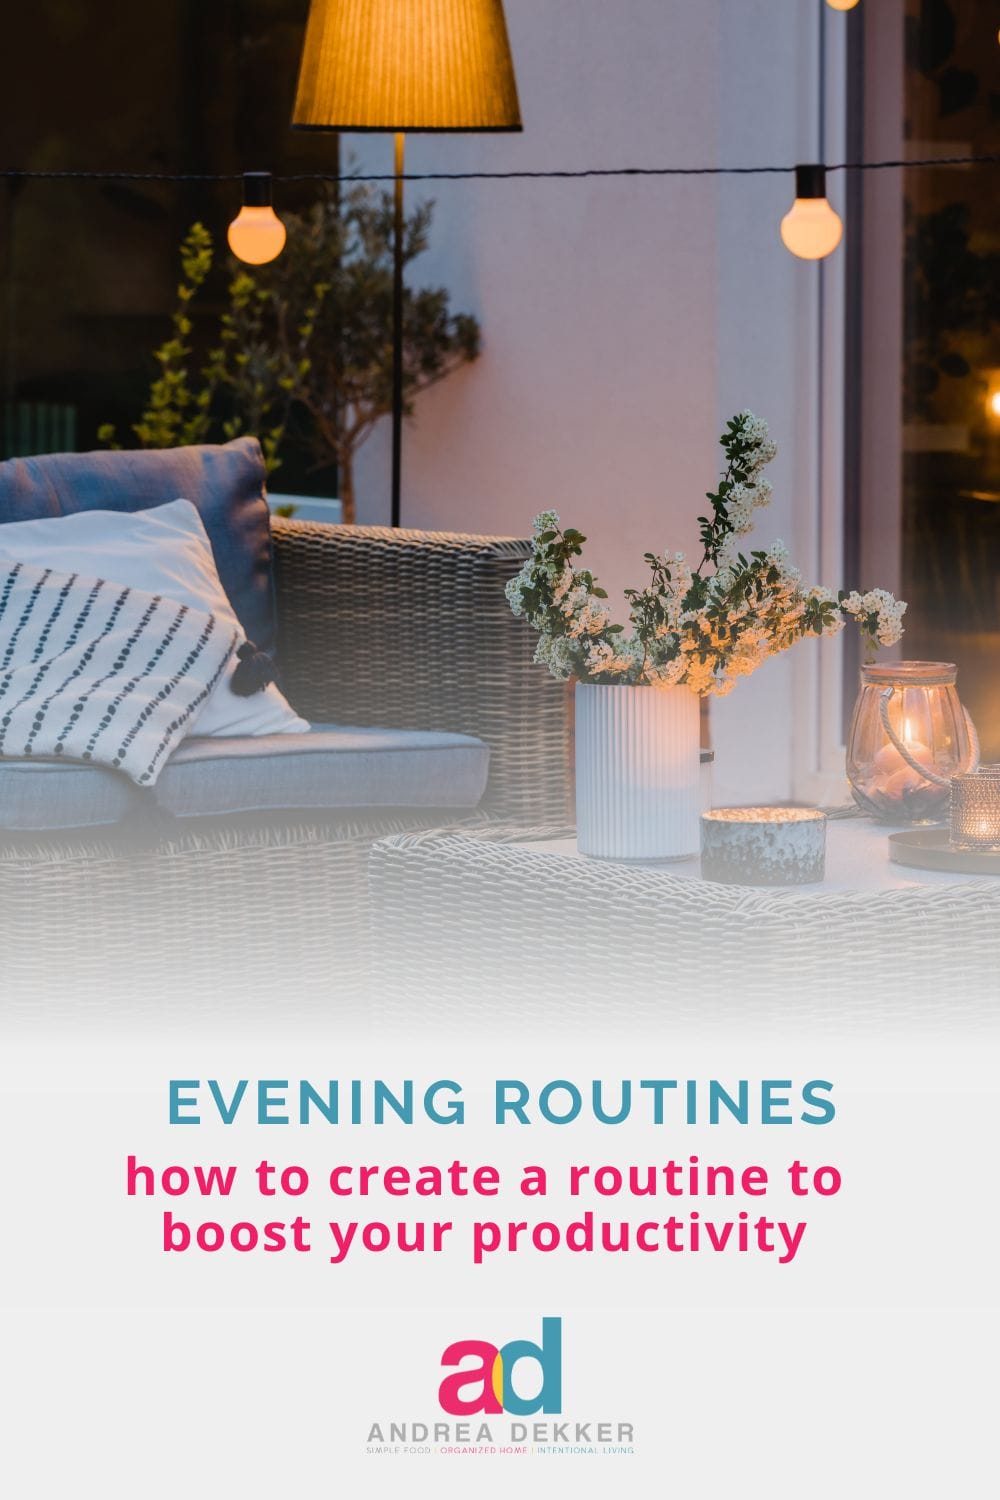 Do you constantly feel like you're running behind, rushing from place to place, or playing "catch-up"? If so, your best bet might be to focus on your evening routine, because organized and productive days almost always start with intentional evening routines. via @andreadekker